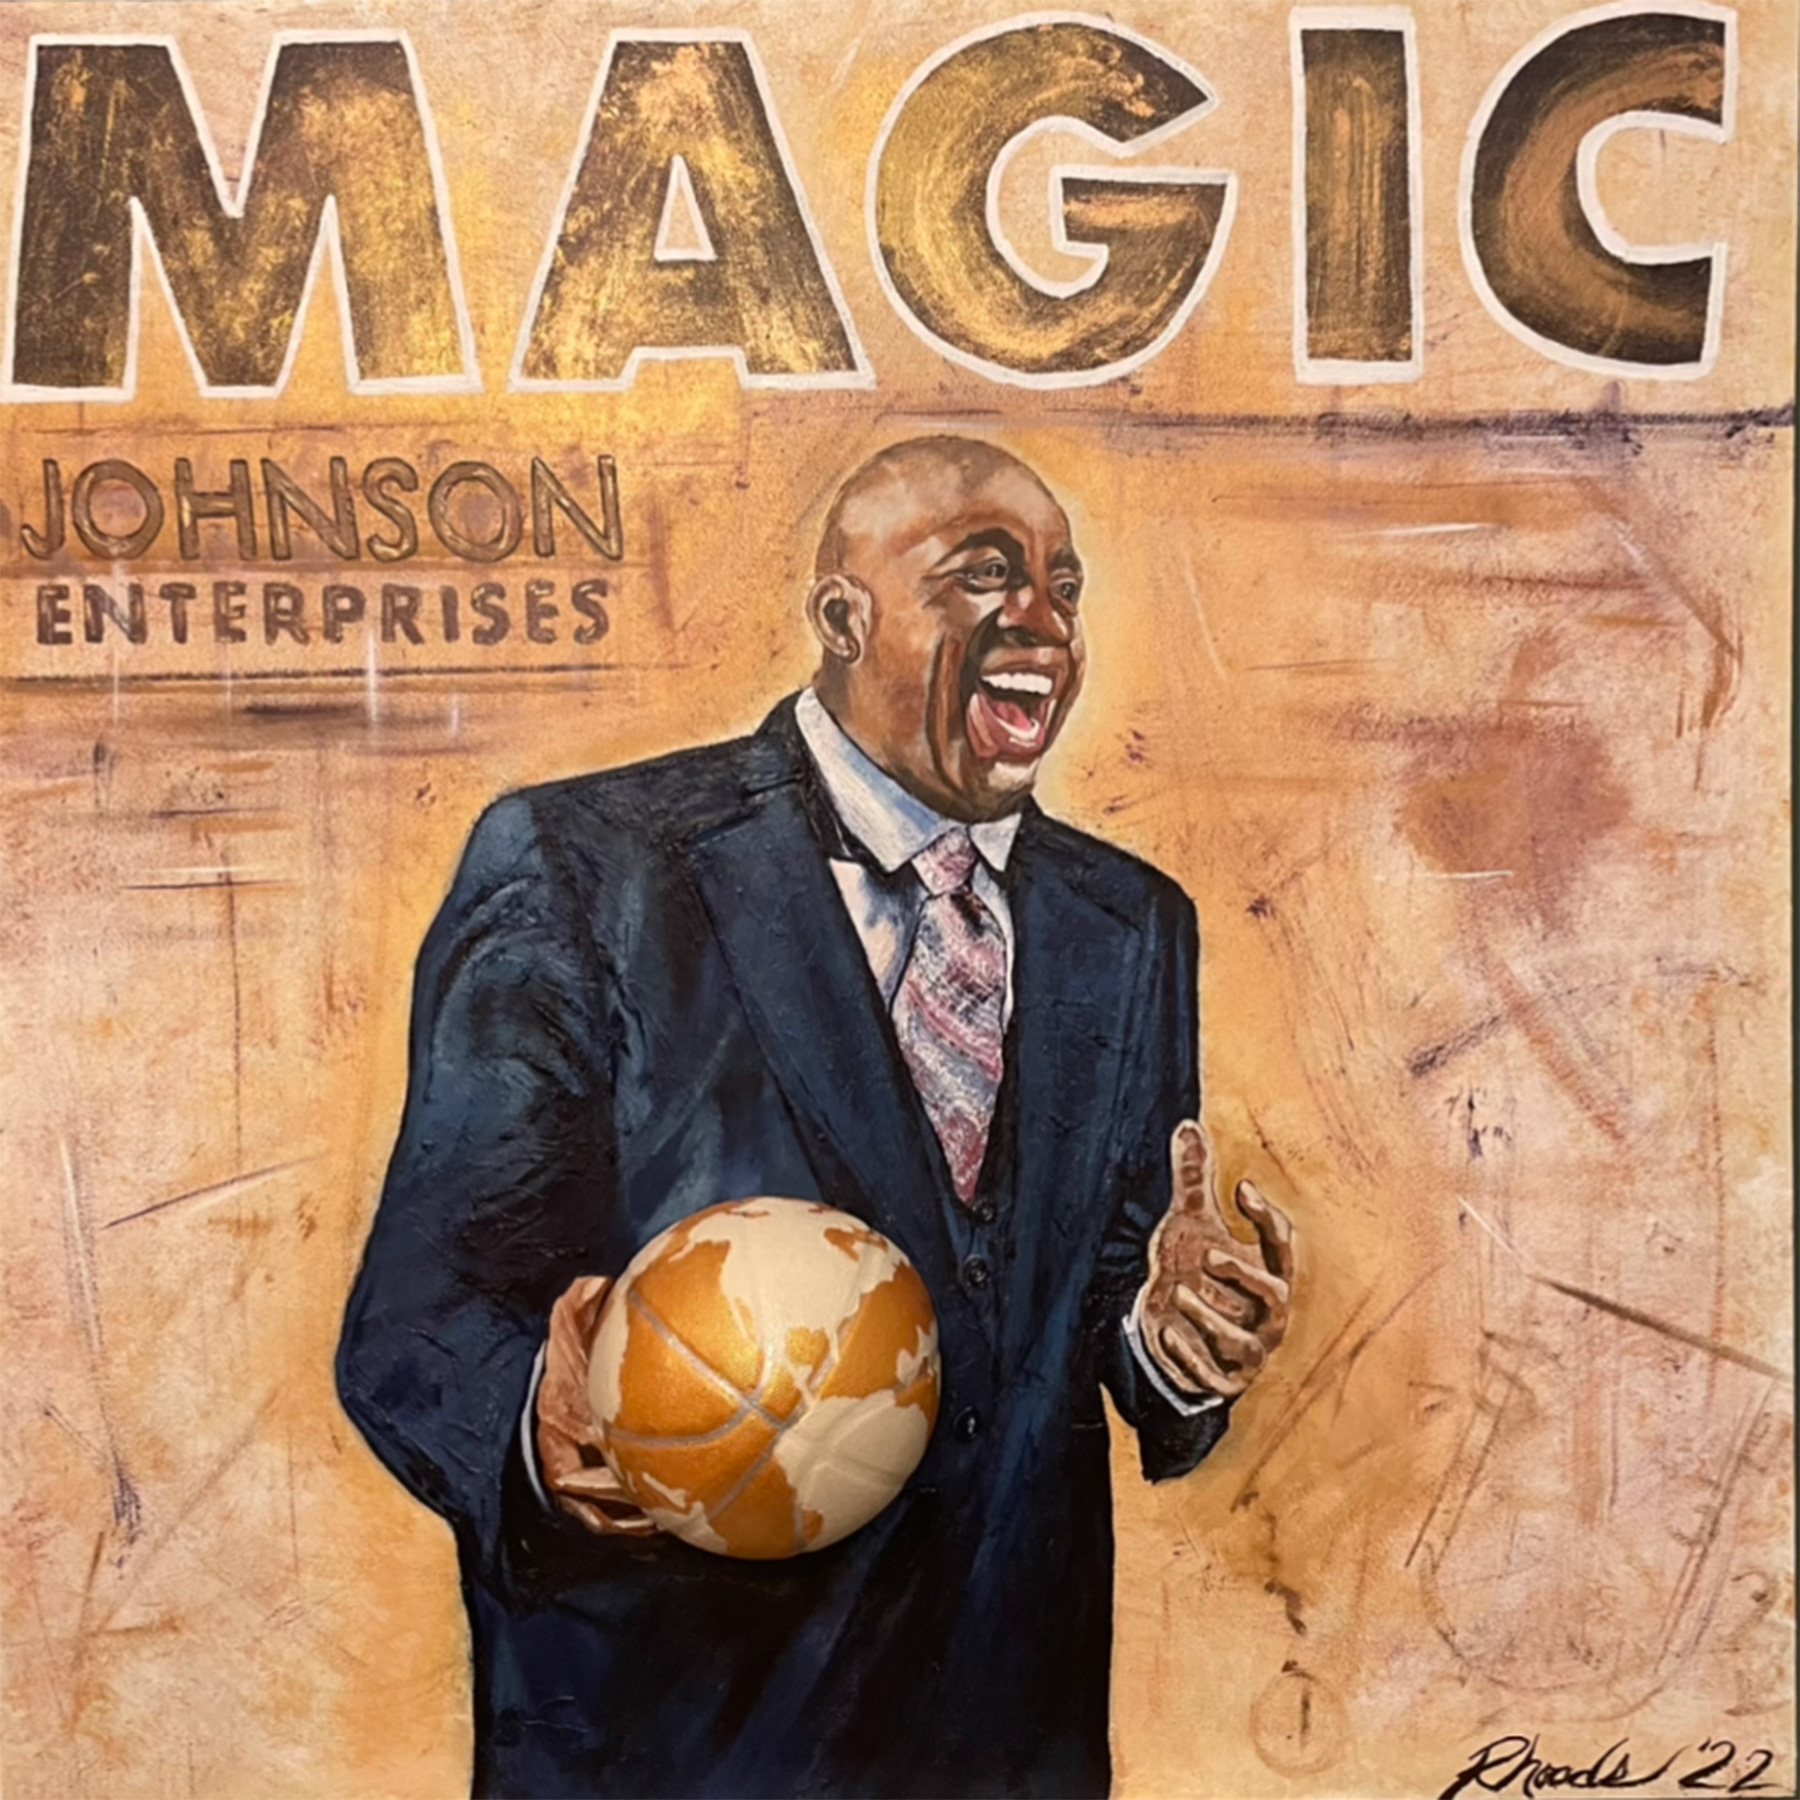 Basketball Forever - Magic Johnson's trophy room. Showtime baby. -  Source24Designs